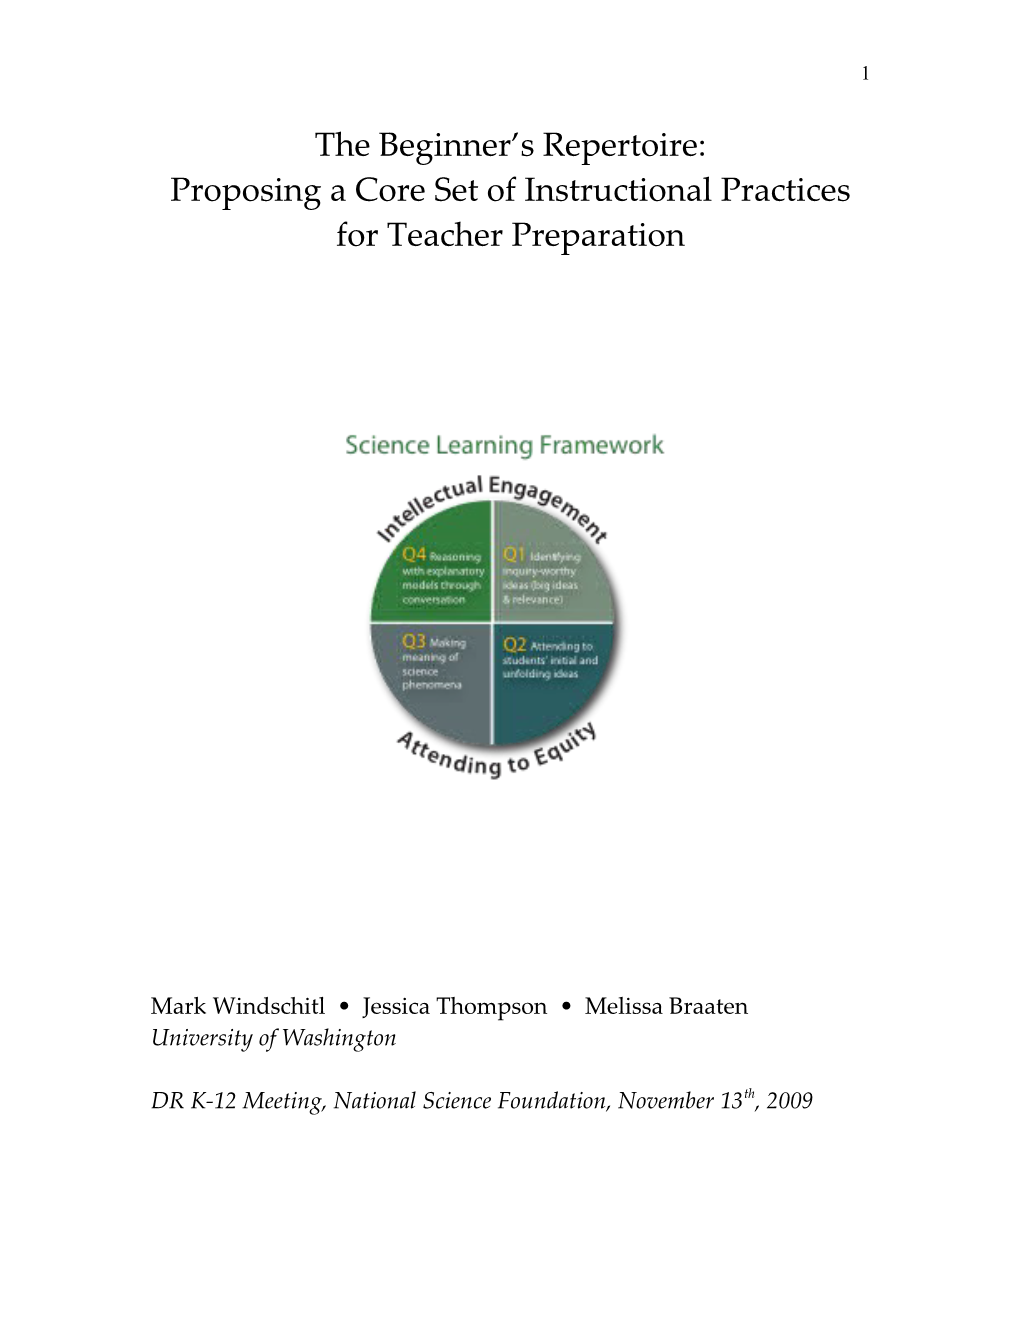 Proposing a Core Set of Instructional Practices for Teacher Preparation